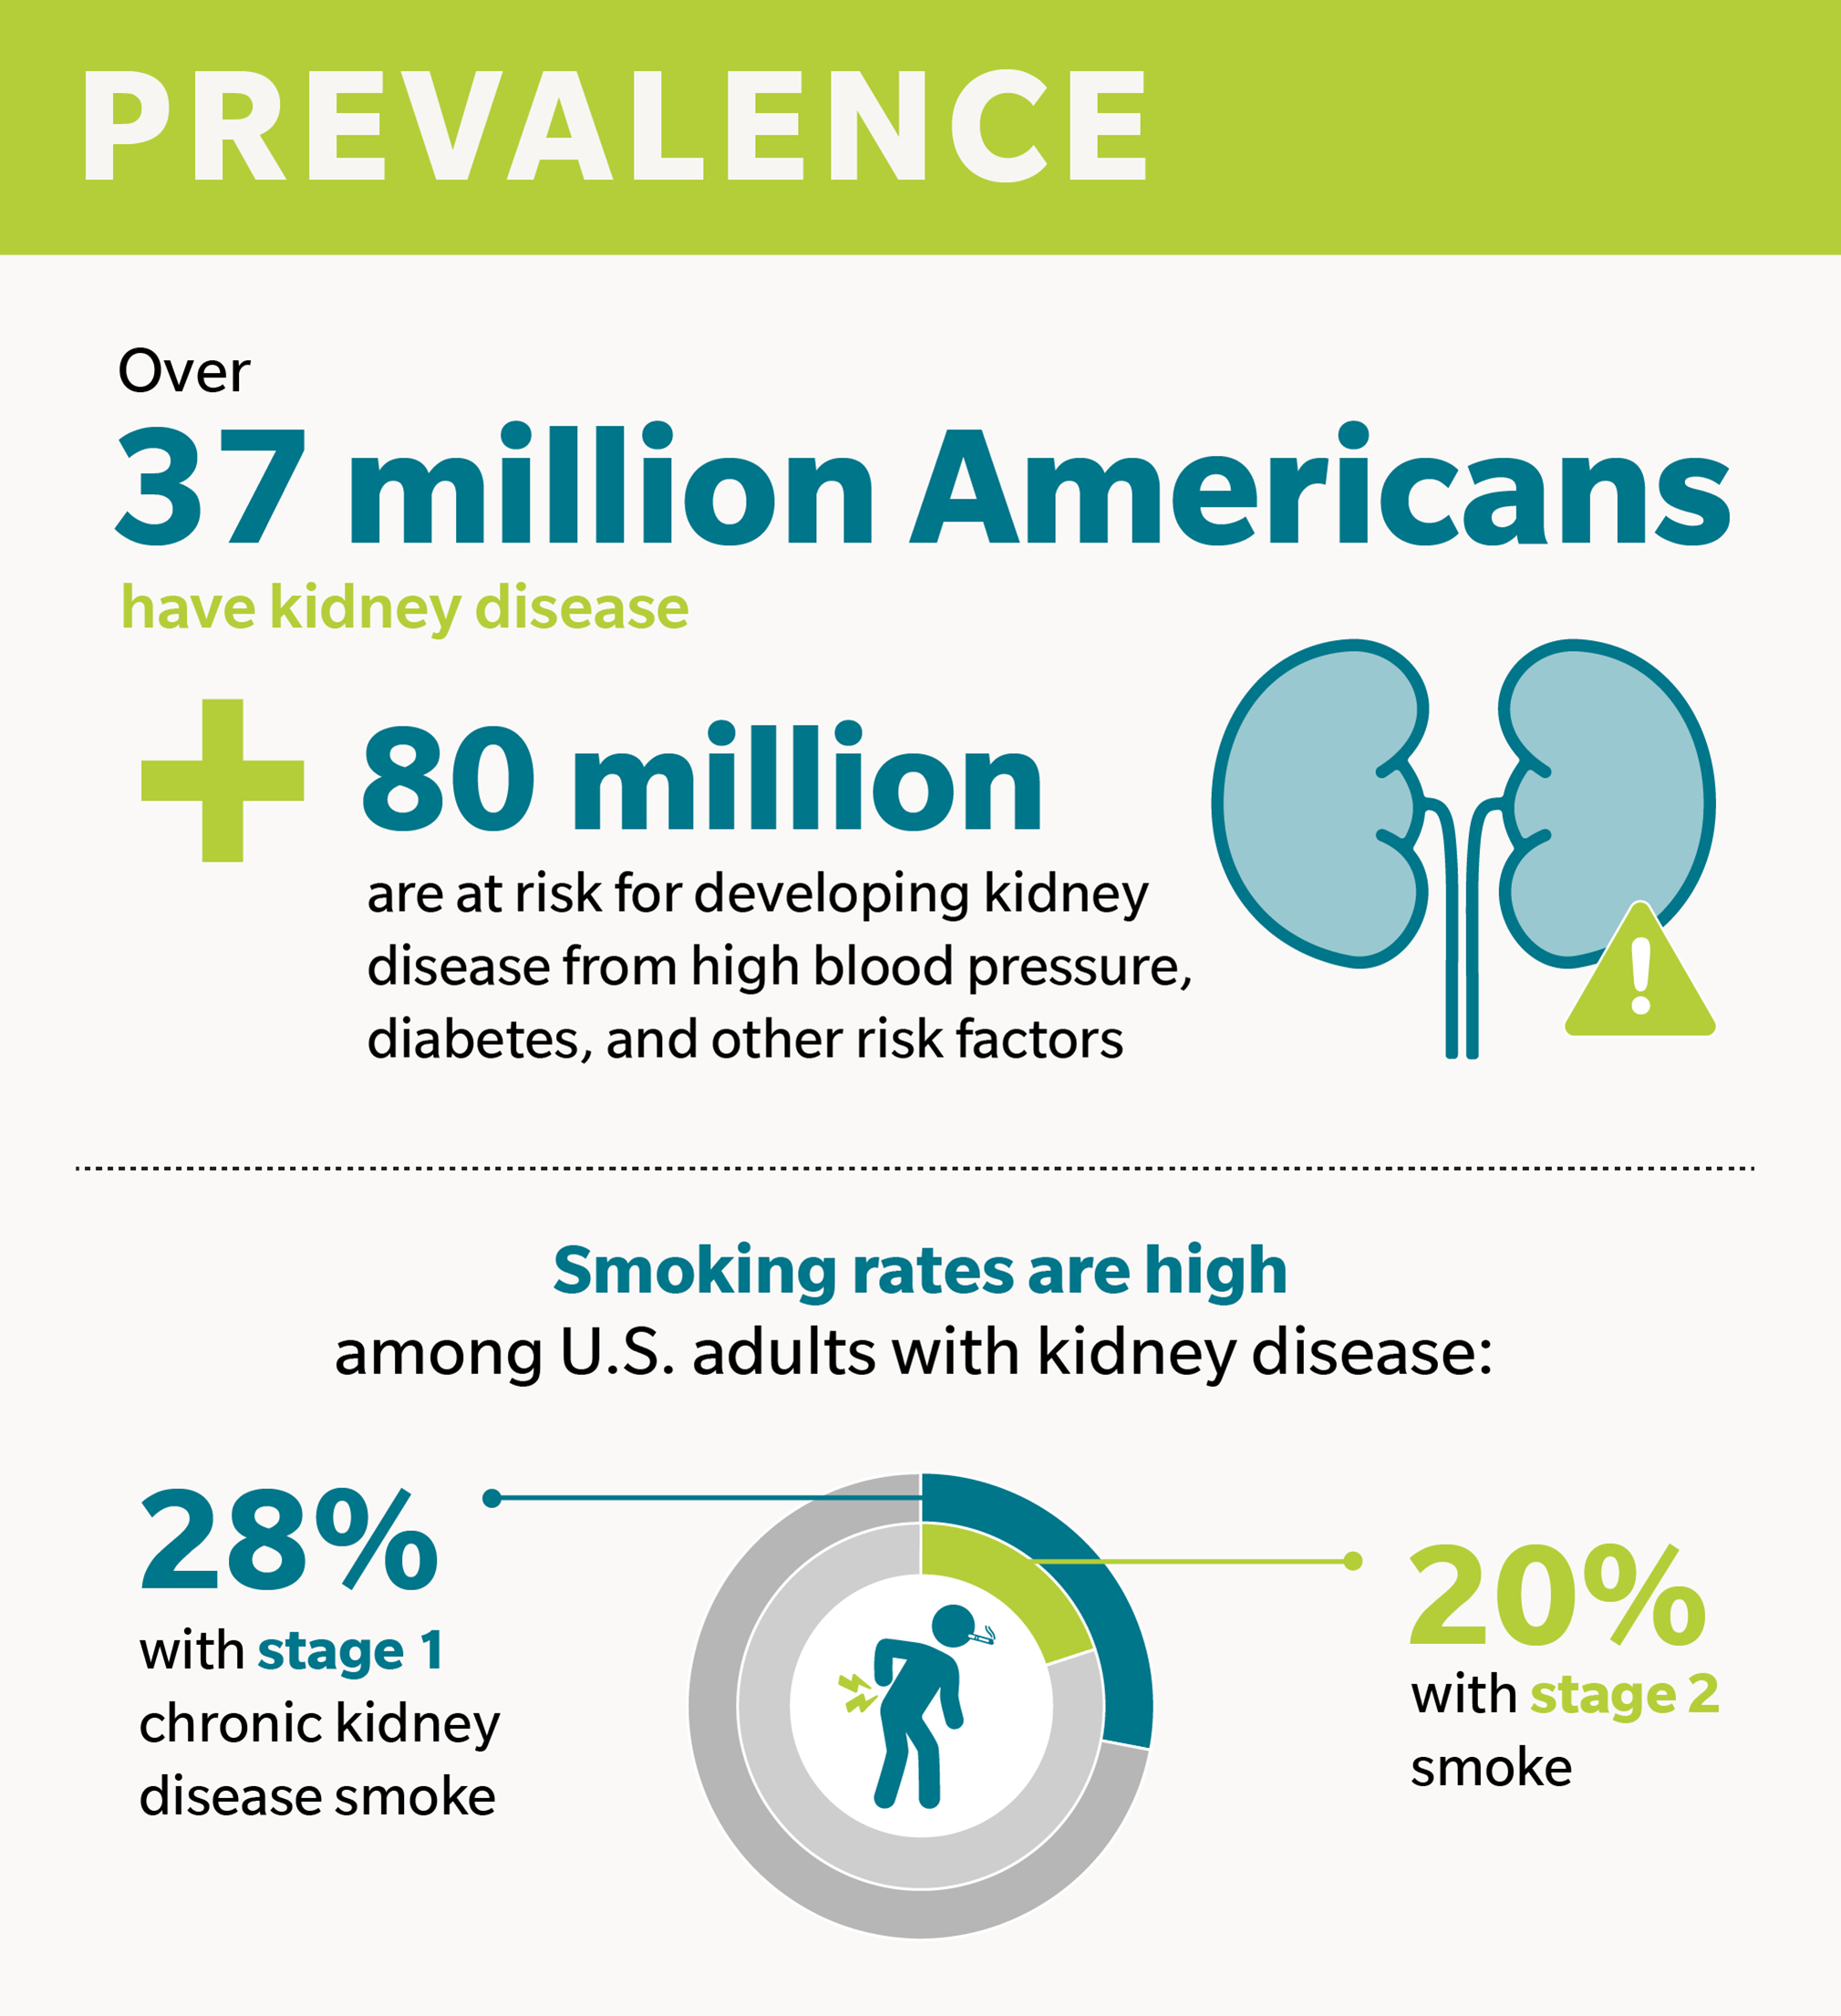 More than 37 million Americans have kidney disease, and another 80 million are at risk for developing kidney disease from high blood pressure, diabetes, and other risk factors. CDC data shows that smoking rates are high among people with kidney disease: 28% of U.S. adults with stage 1 chronic kidney disease and 20% with stage 2 smoke compared to 12% in the general population. 